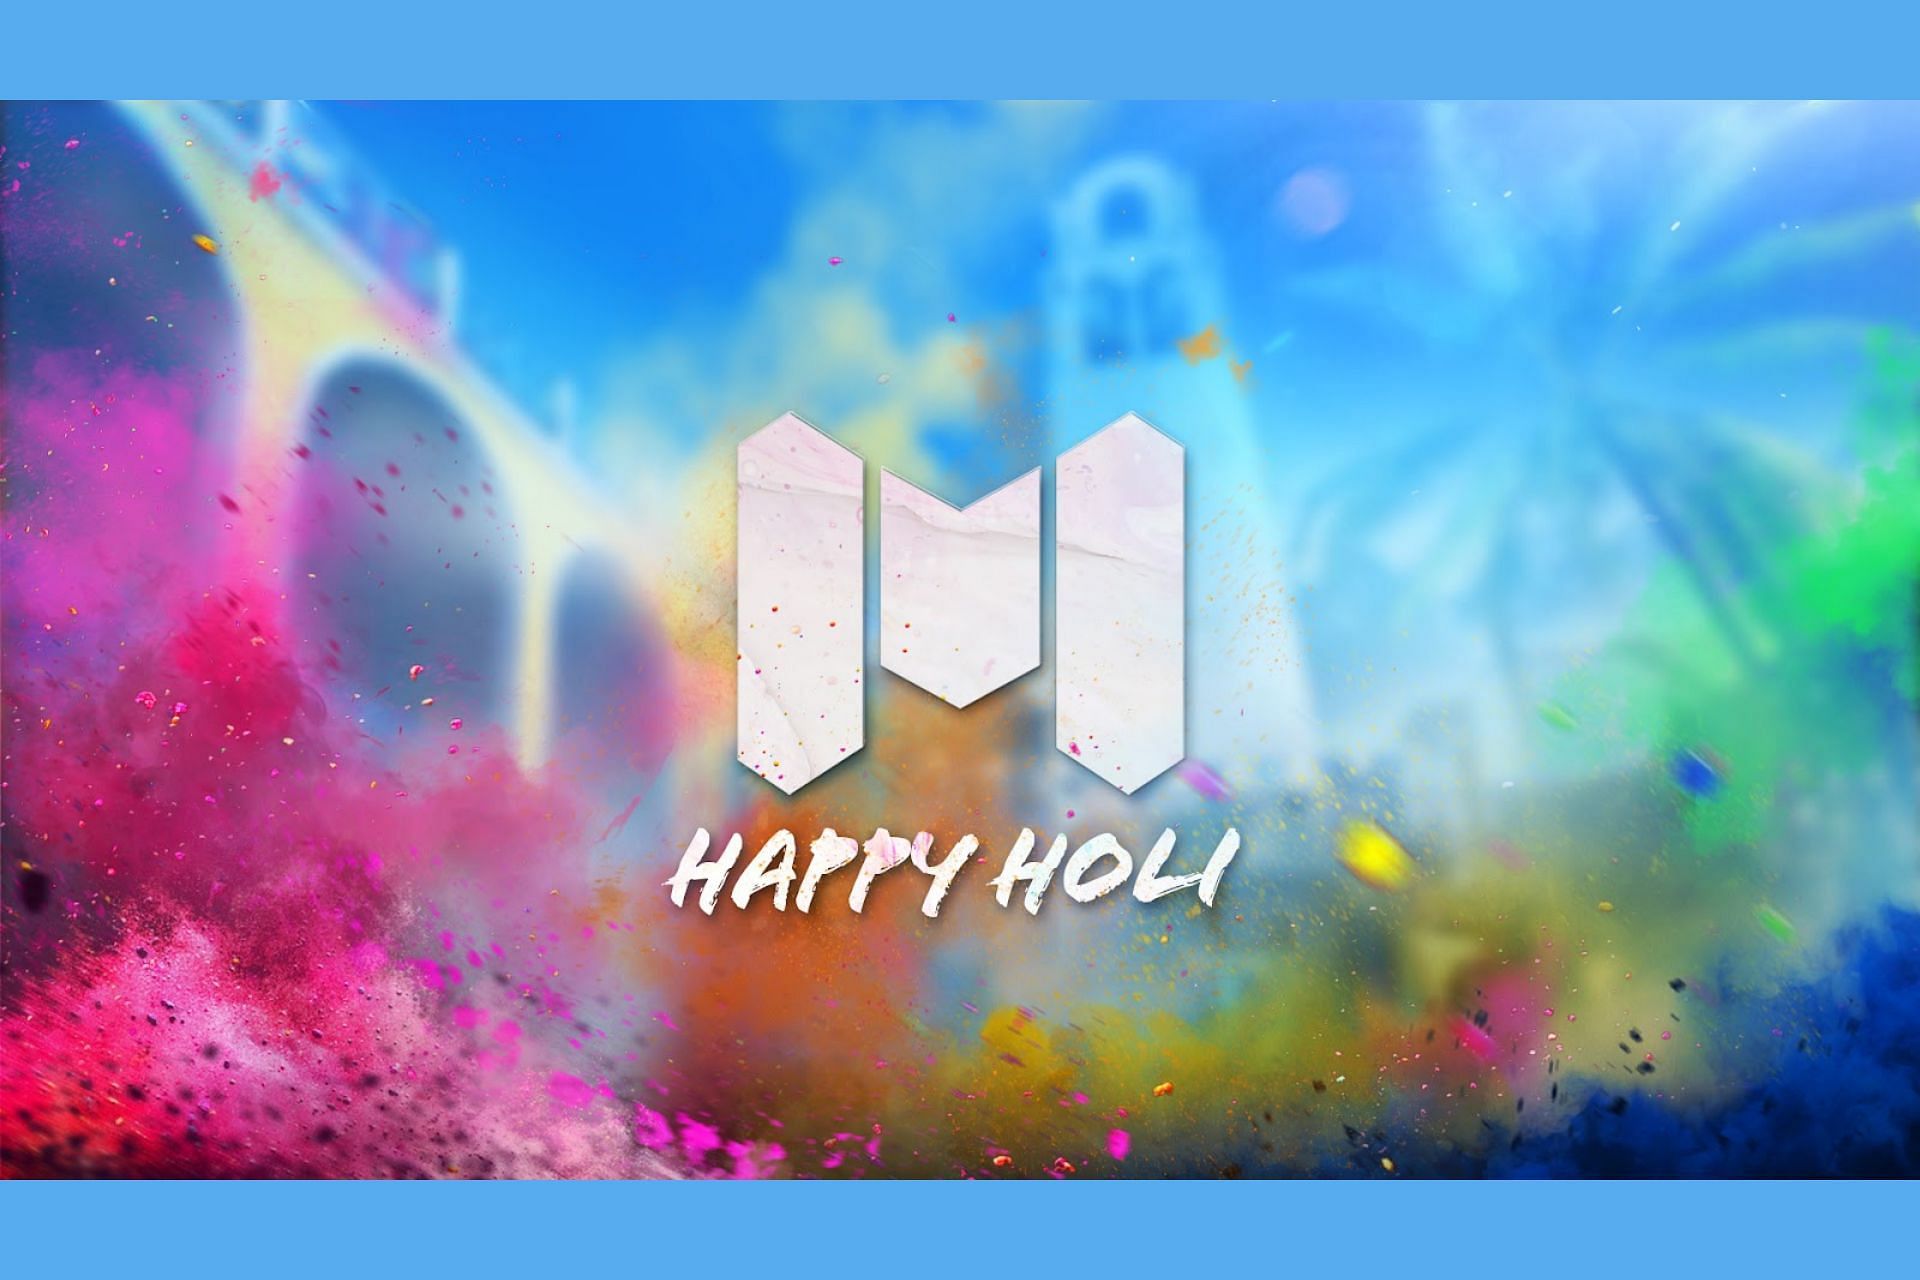 COD Mobile is celebrating Holi specially for Indian players with exclusive bundles, free rewards and more (Image via Activision)